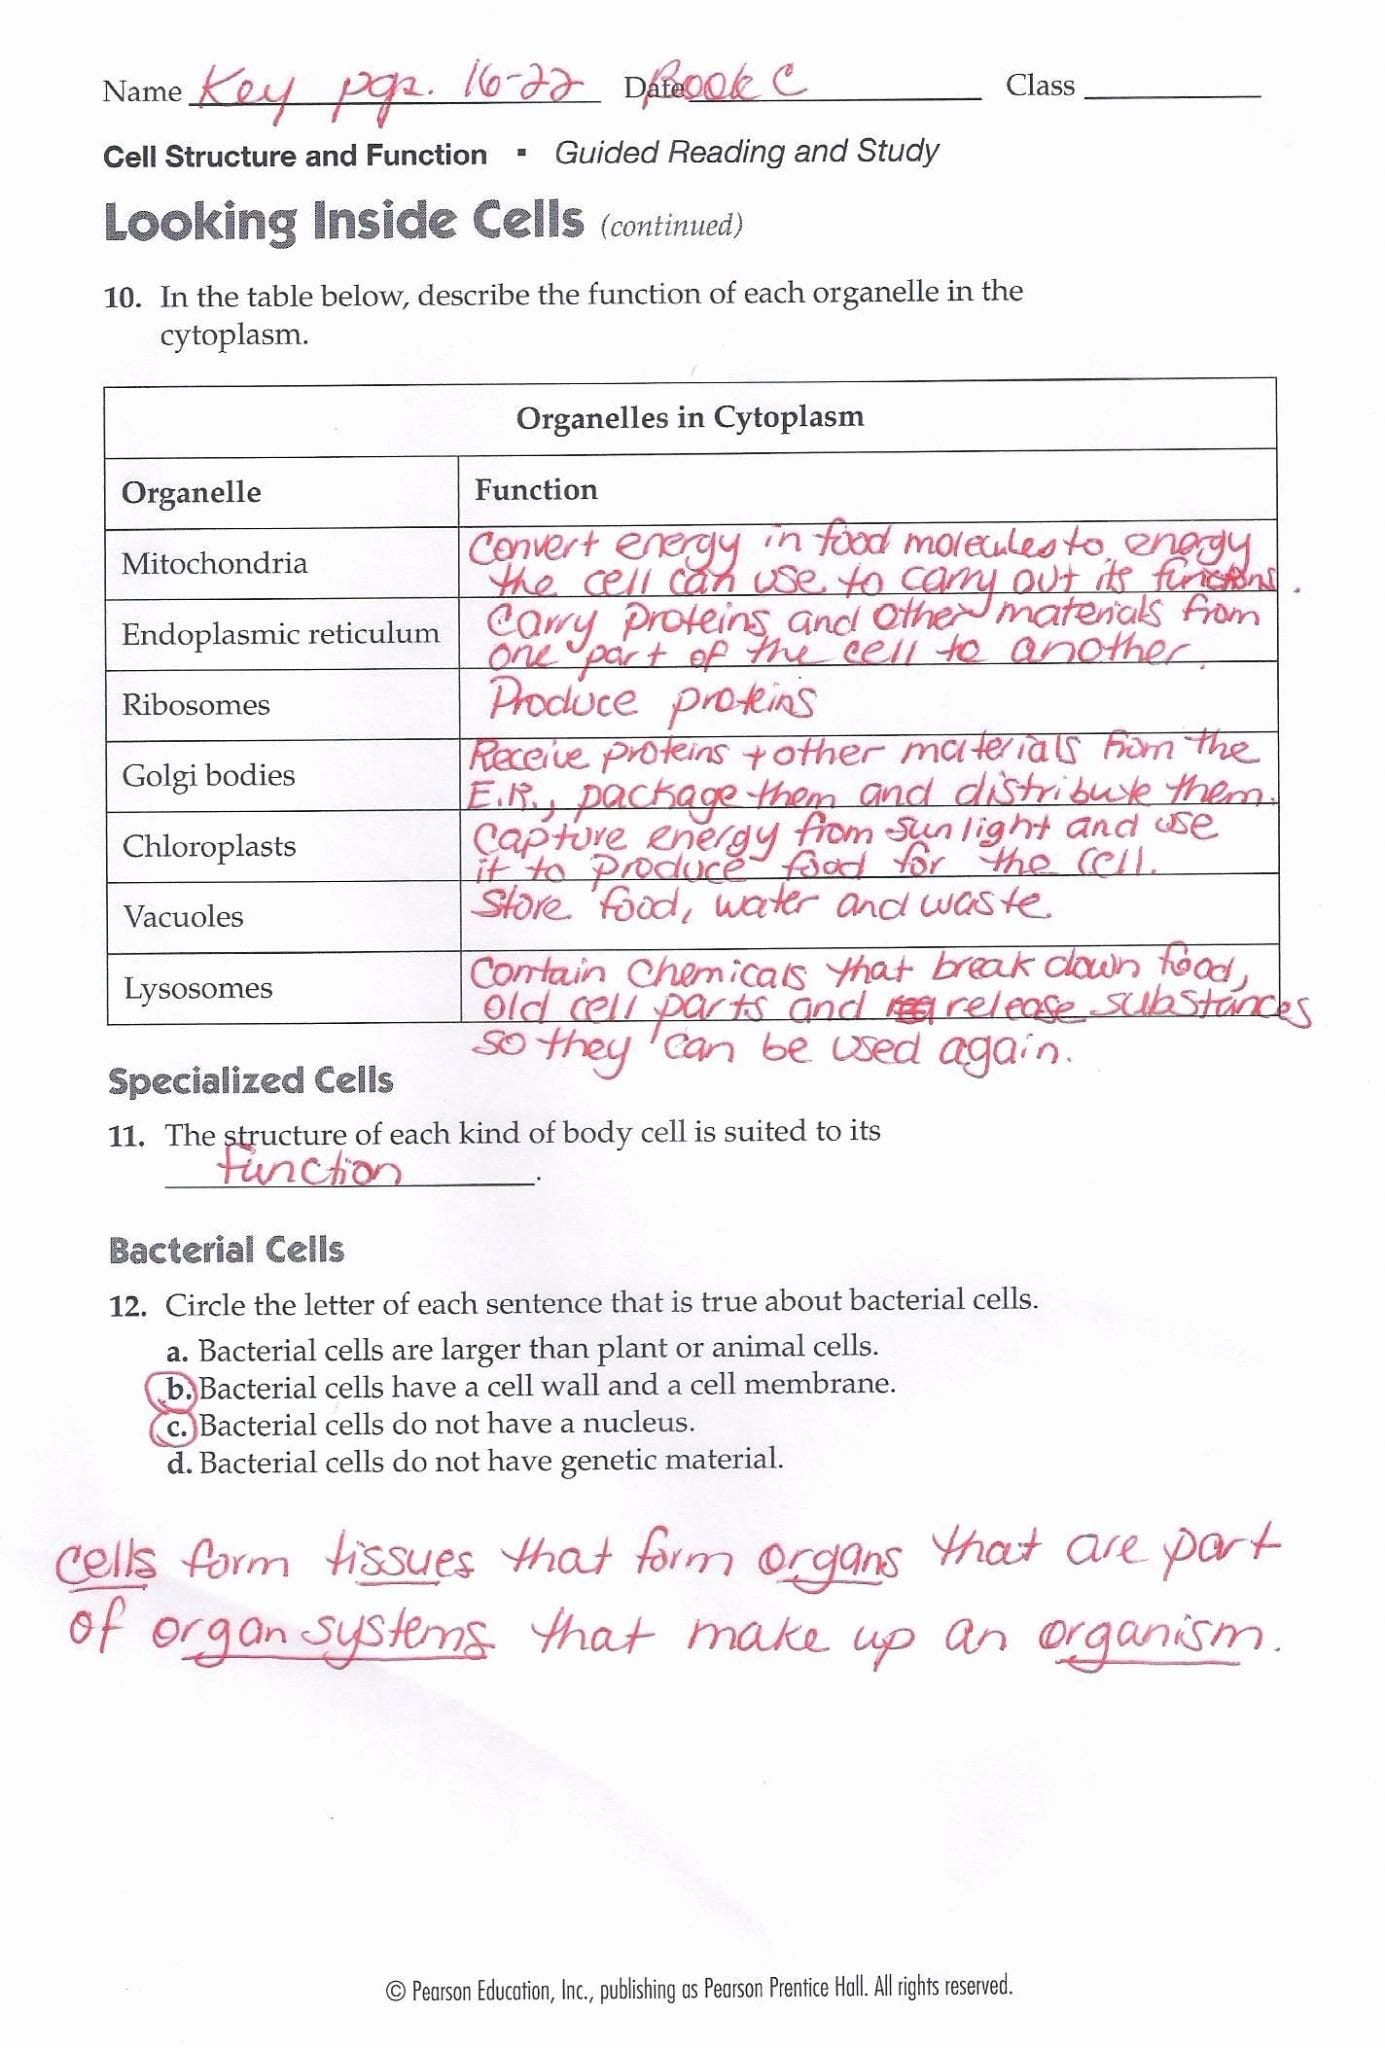 Looking Inside Cells Worksheet Answers  Briefencounters For Looking Inside Cells Worksheet Answers